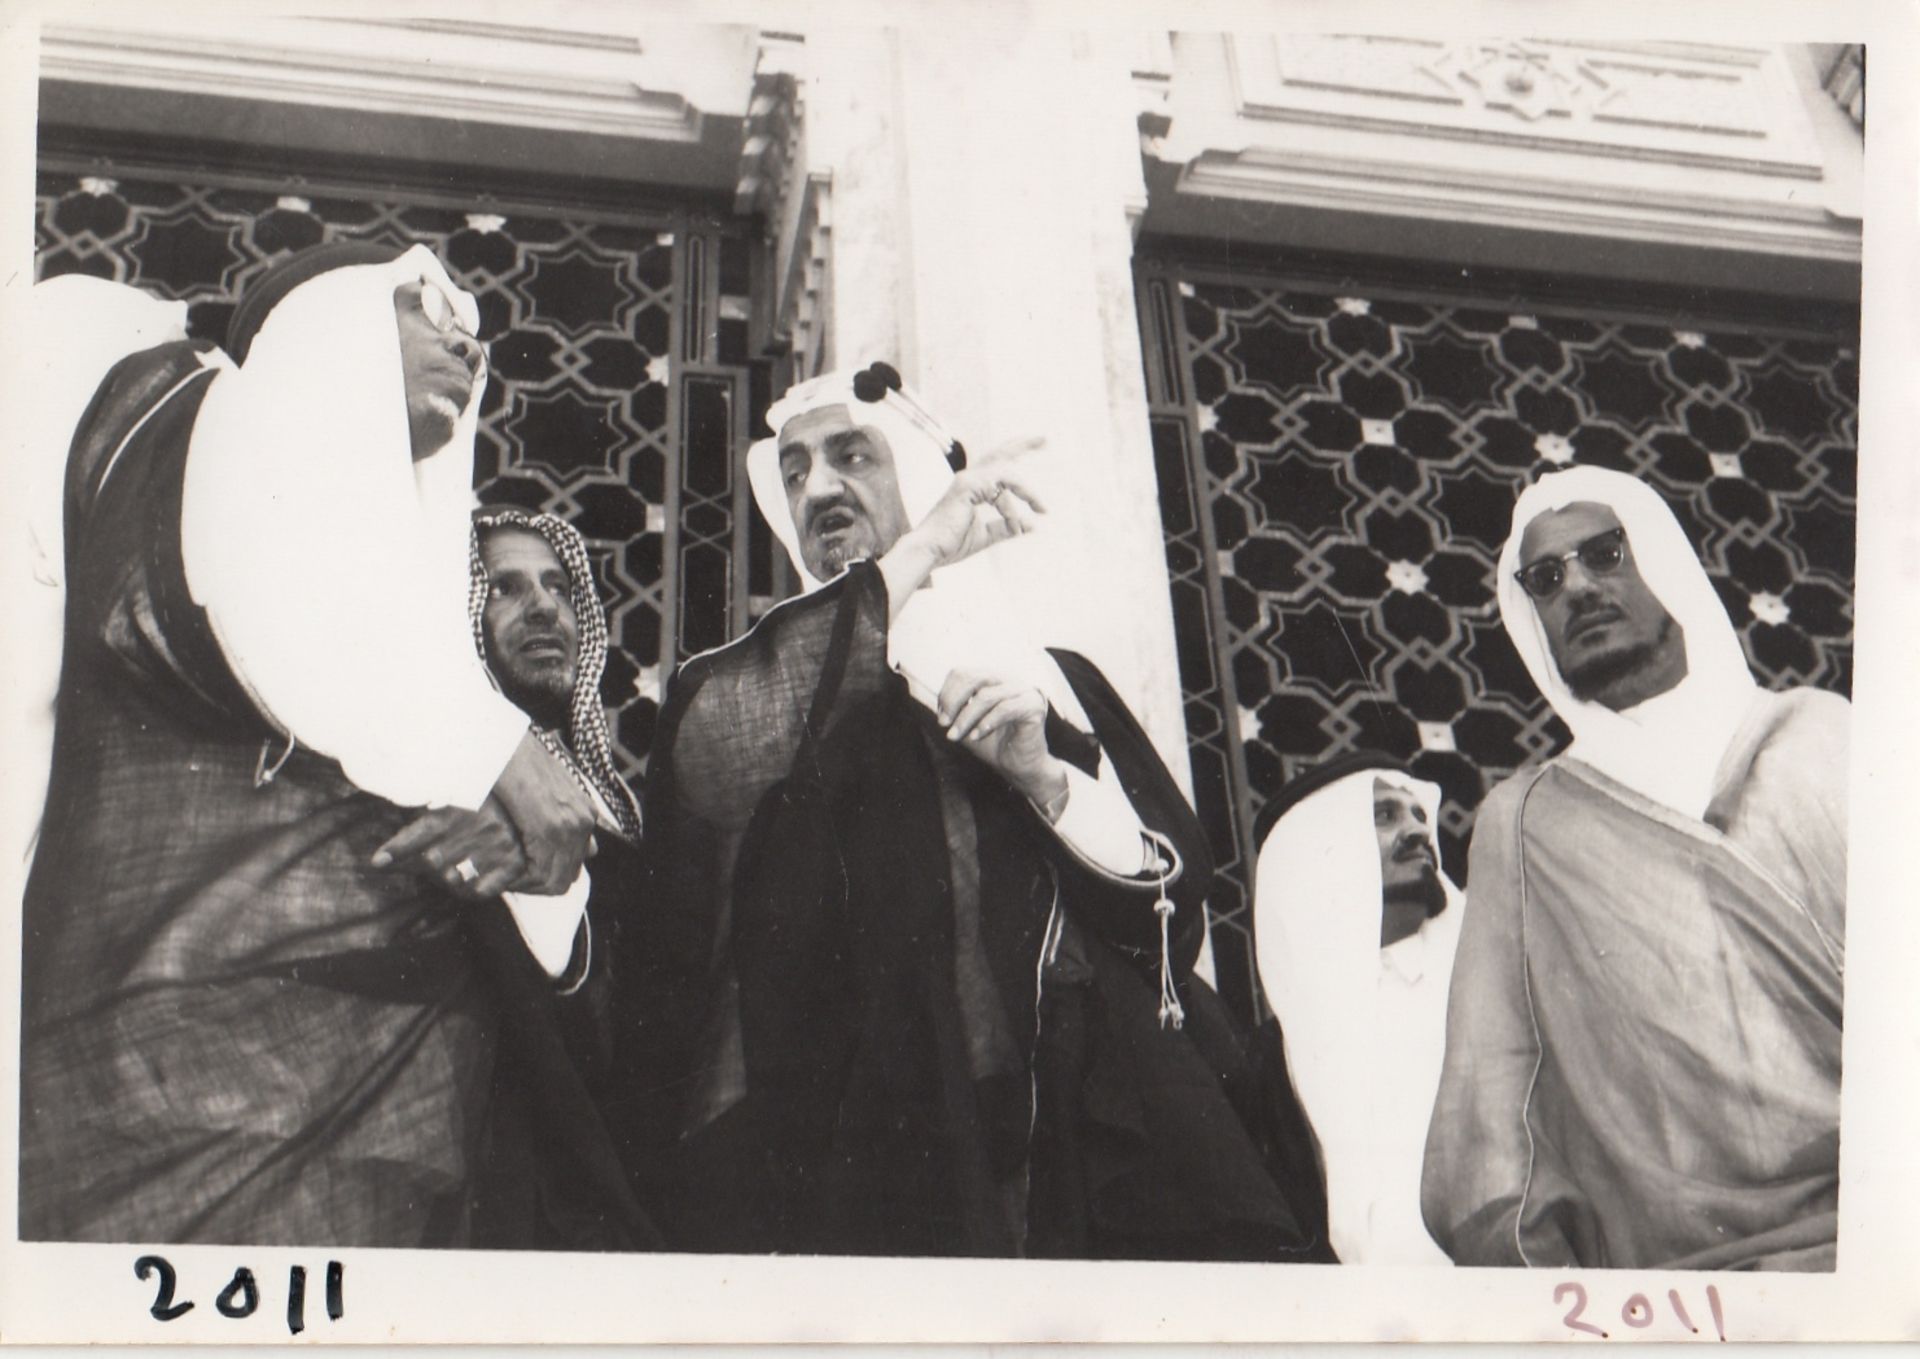 A COLLECTION OF PHOTOGRAPHS OF HIS MAJESTY KING FAISAL BIN ABDUL AZIZ VISITING THE GRAND MOSQUES OF - Image 23 of 24